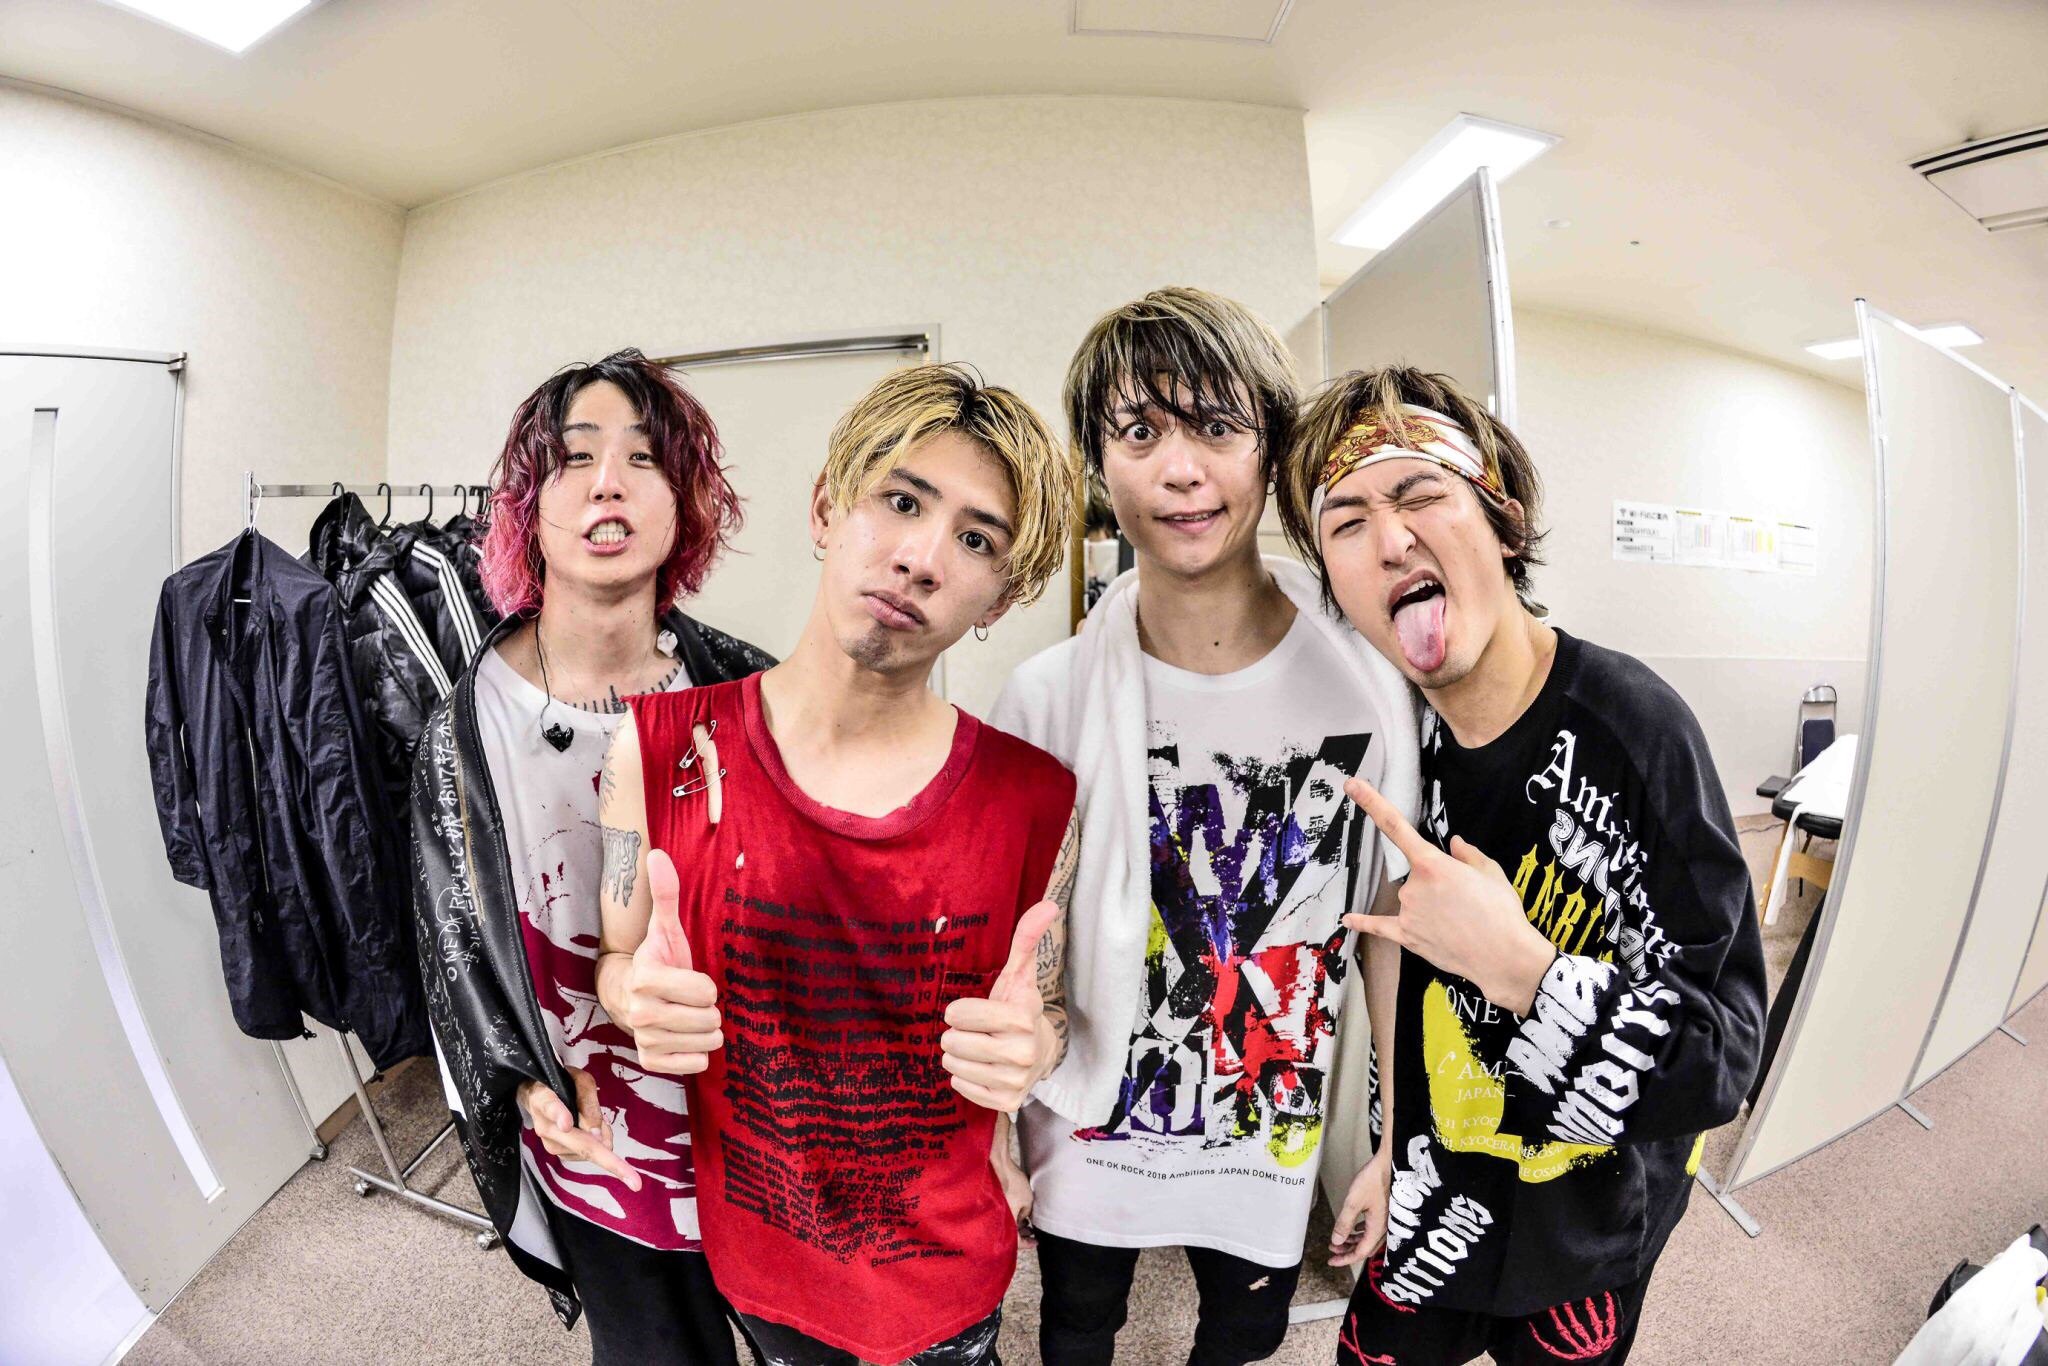 ONE OK ROCK 2018 AMBITIONS JAPAN DOME TO